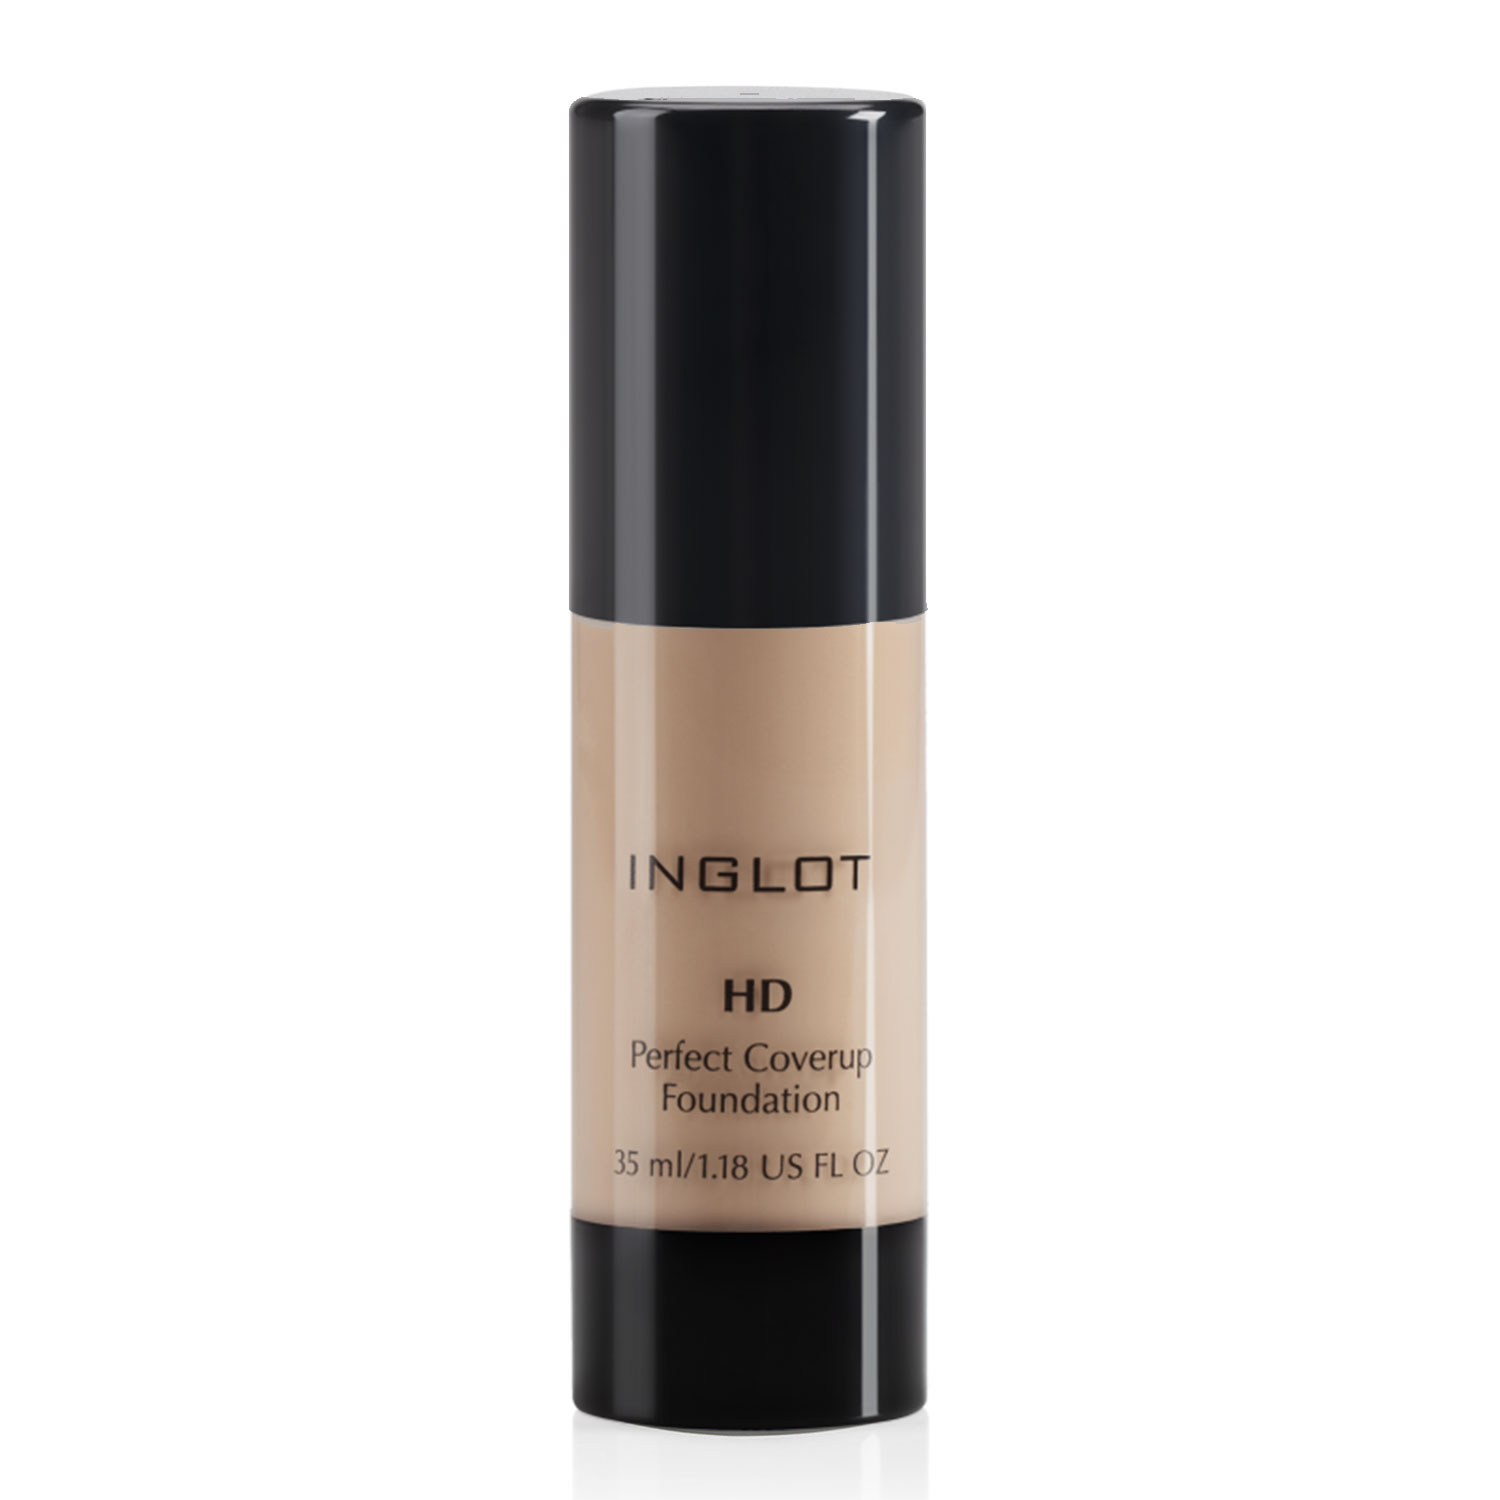 Inglot Hd Perfect Coverup Foundation, 35ml-83 Brown